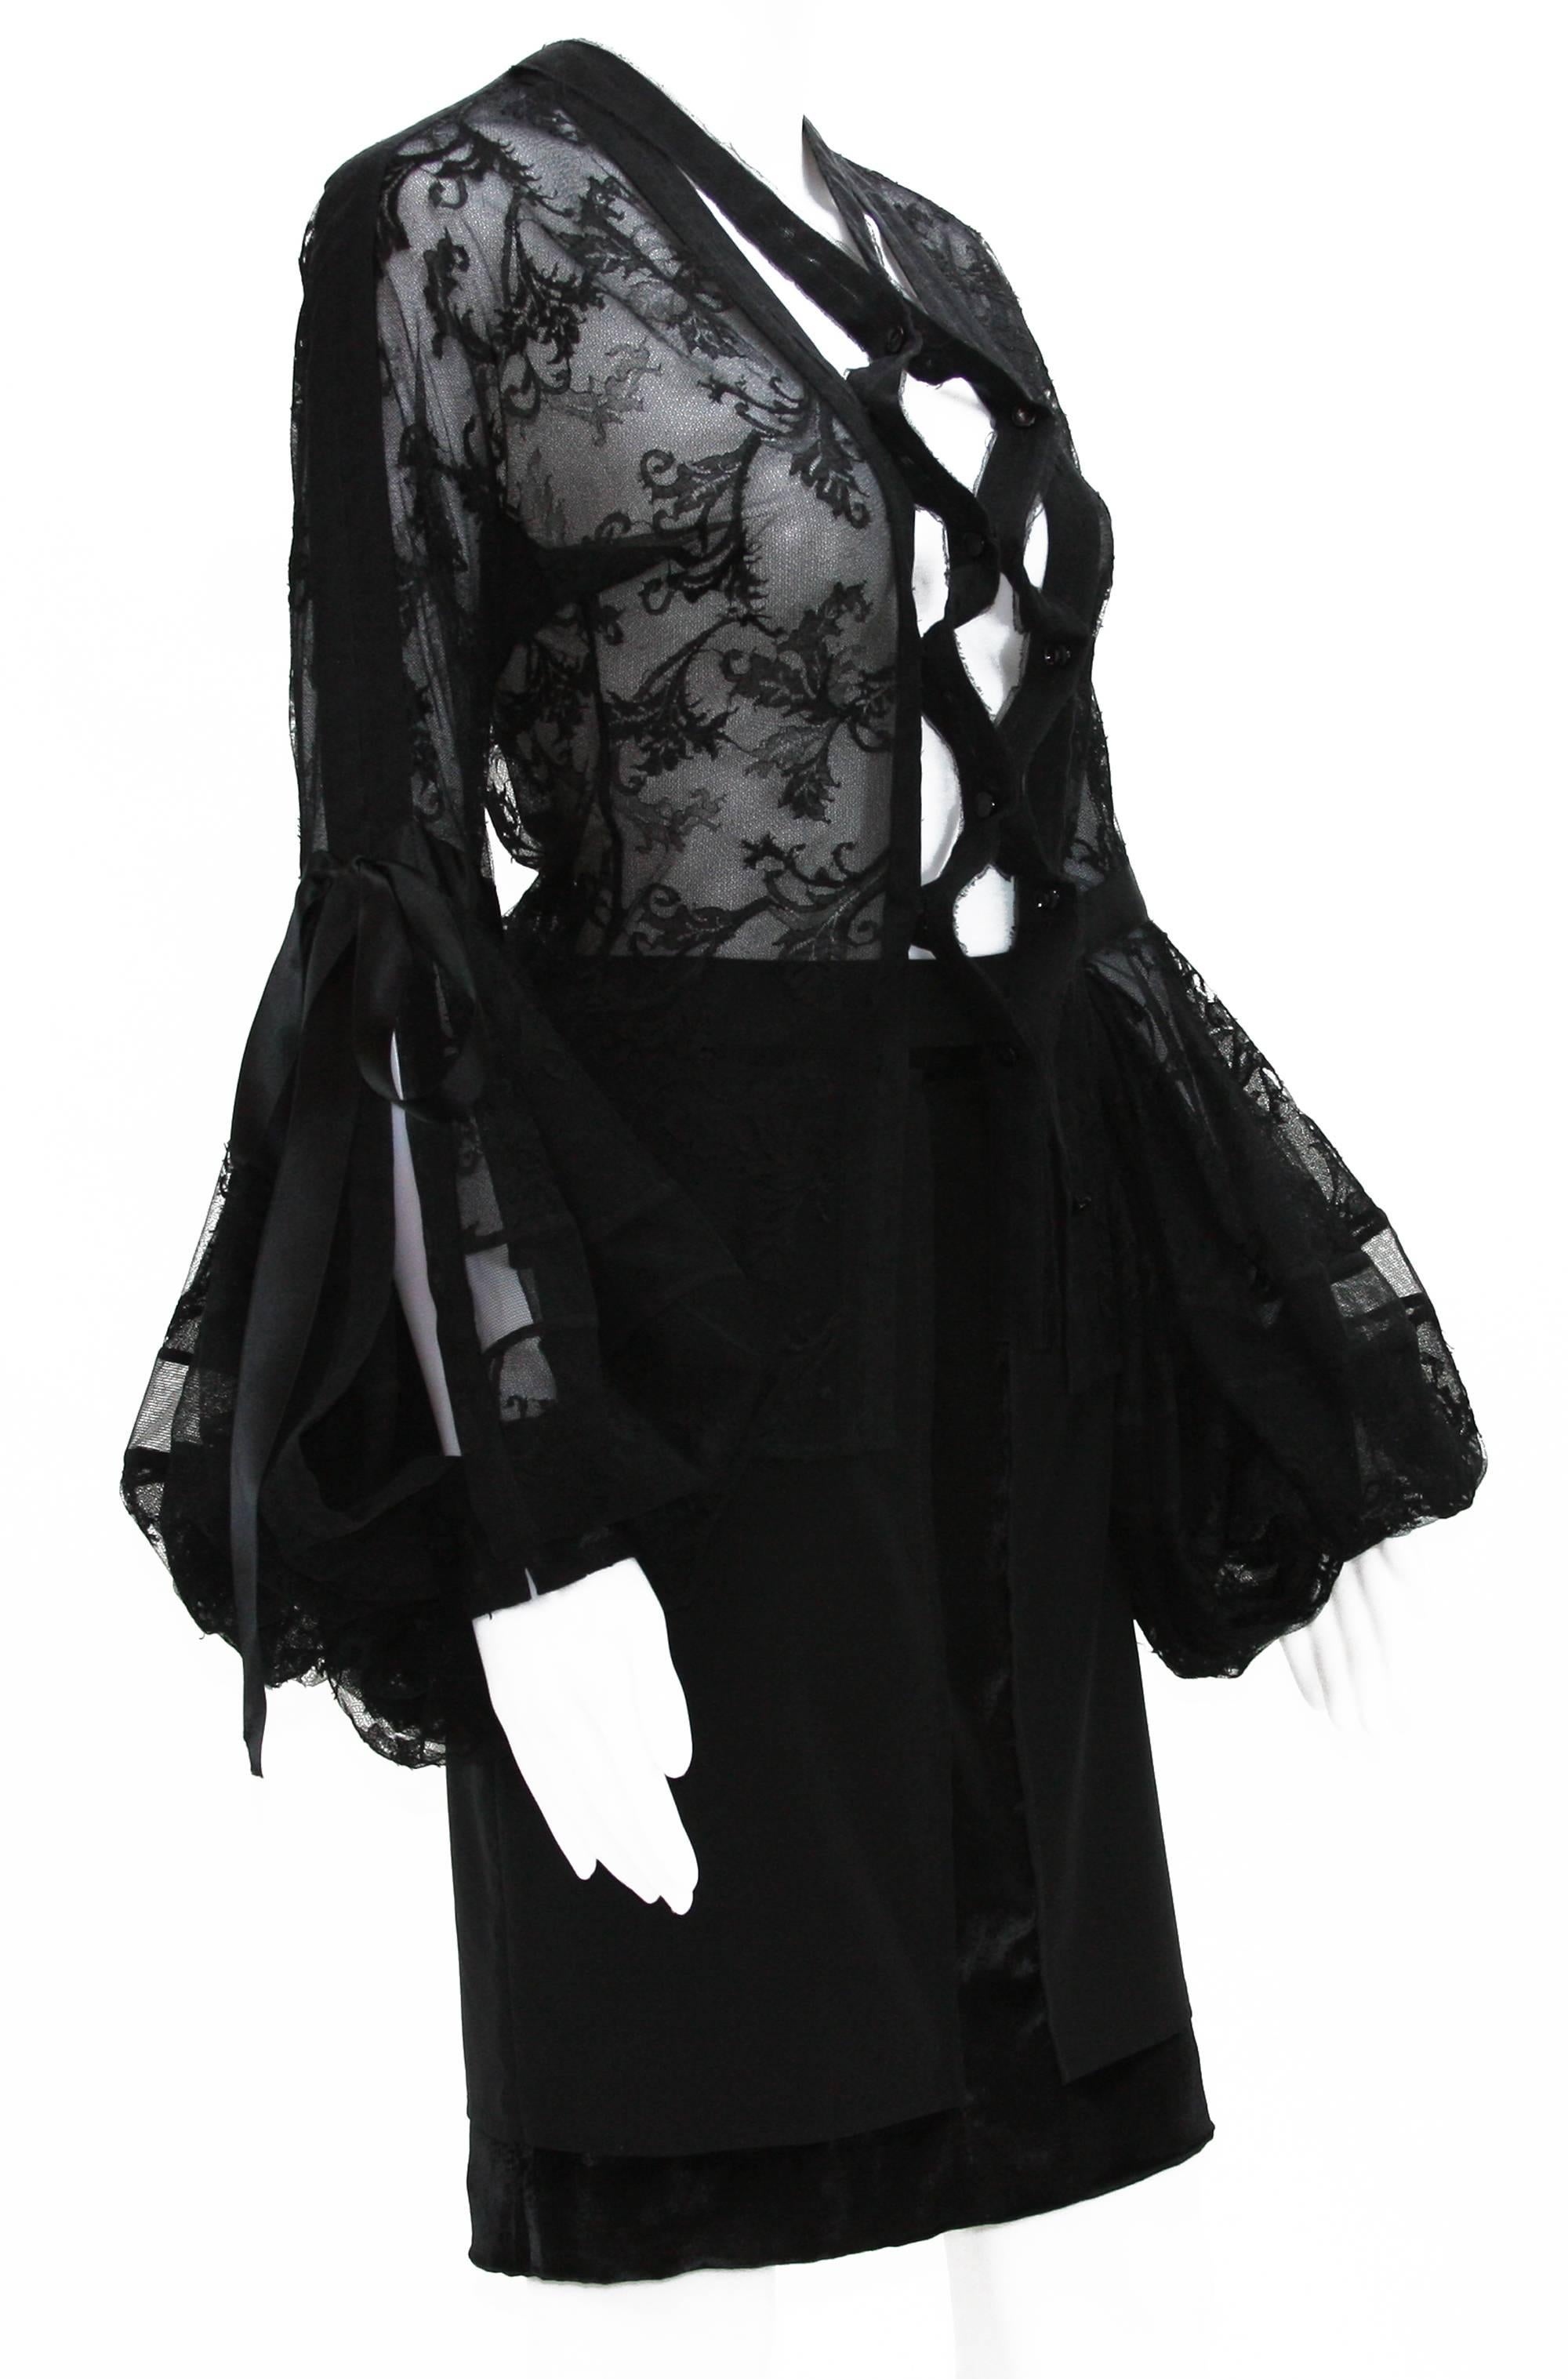 Tom Ford for Yves Saint Laurent Skirt Set
F/W 2002 Collection
Color - Black.
Lace Blouse with Silk Ribbons. Fabric is stretch.
Skirt - Silk and Velvet. Fully lined. Two Back Pockets.
Measurements flat: 
Blouse: Bust - 16 inches, Sleeve - 32.5